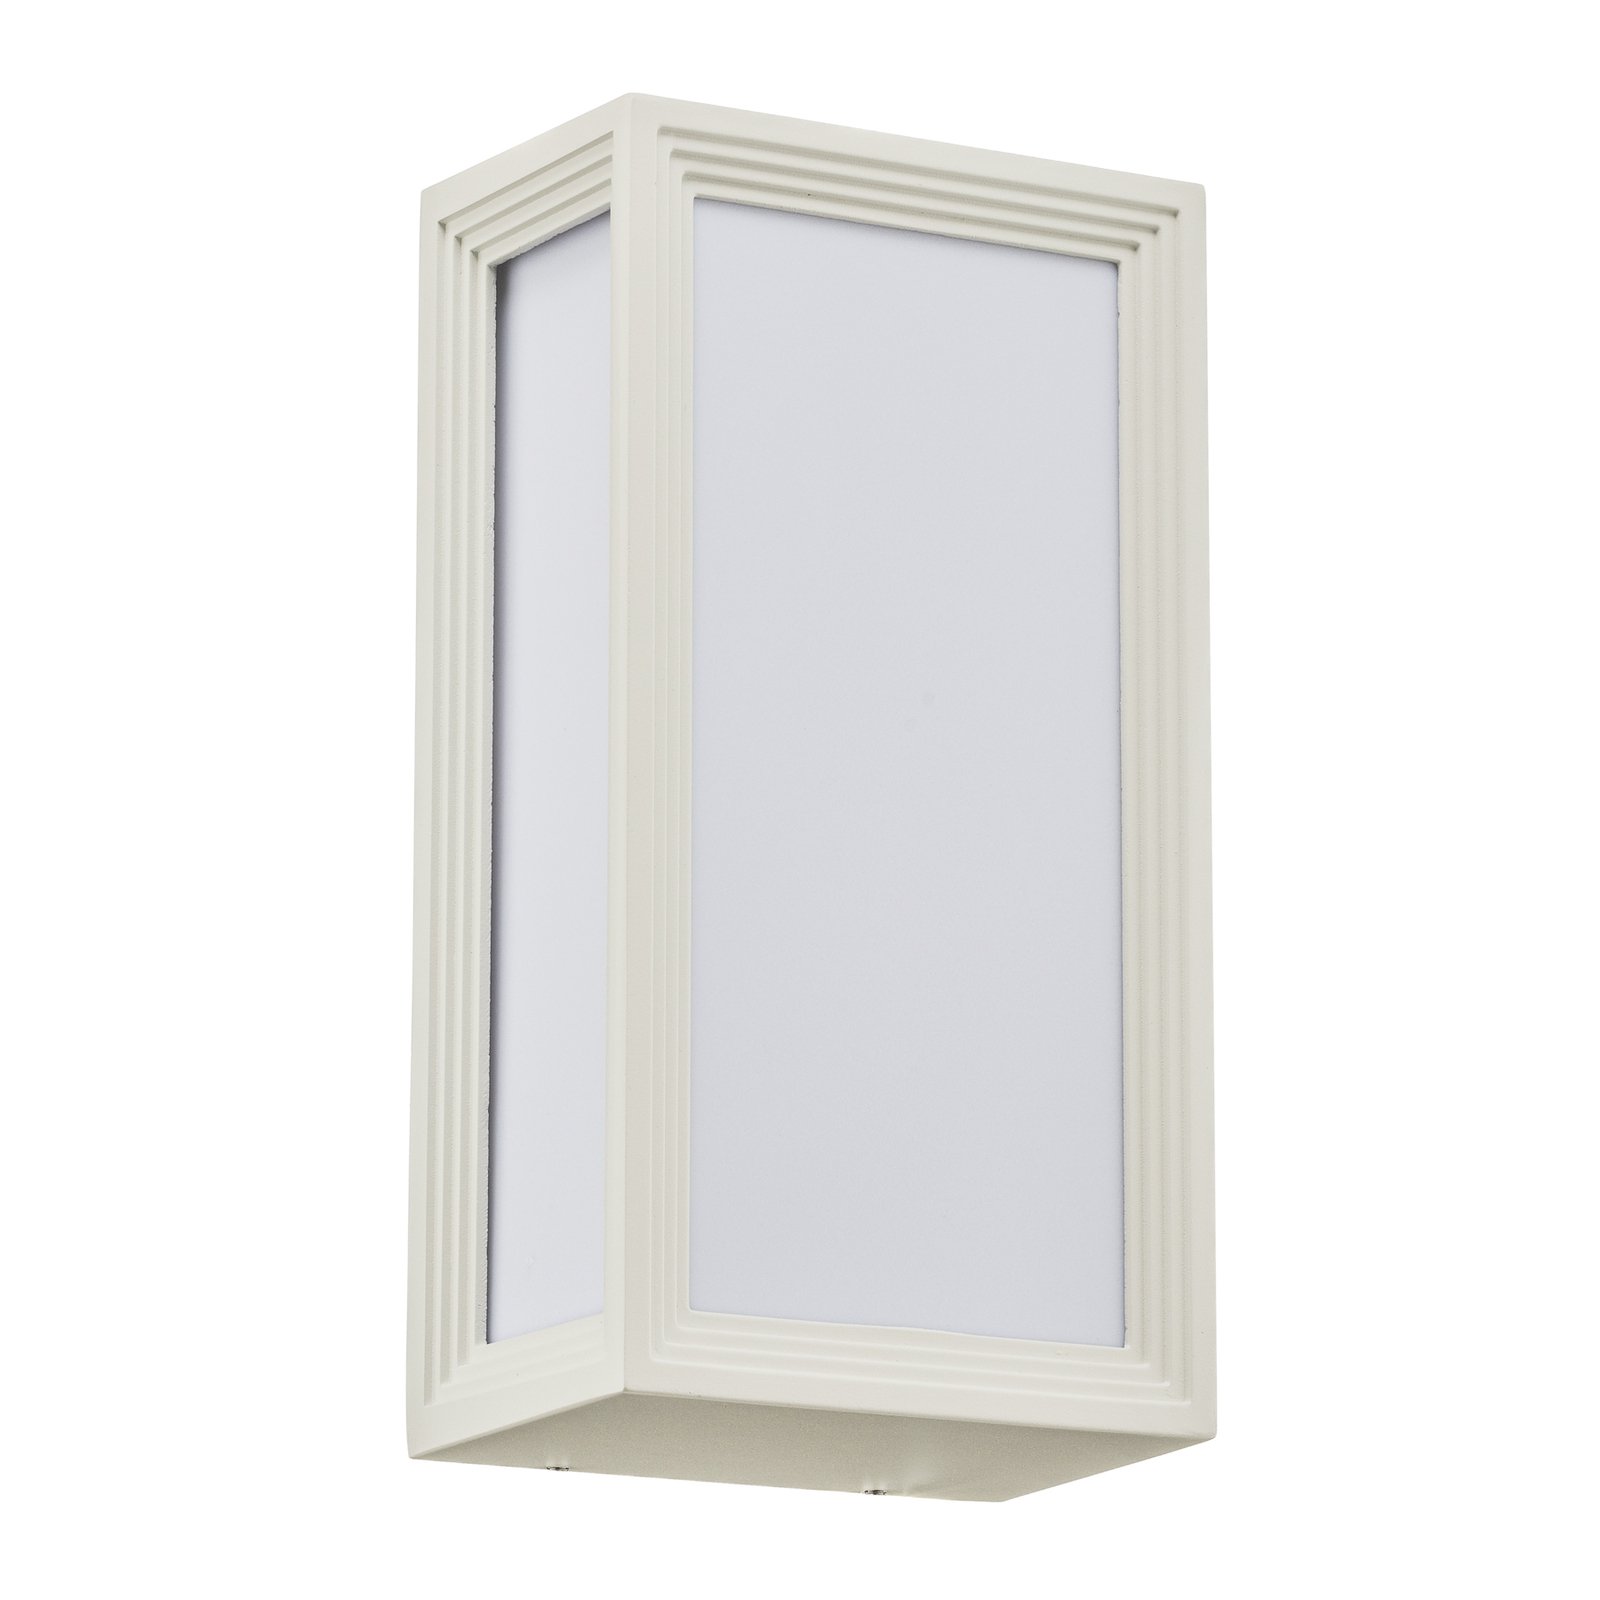 Timok LED outdoor wall light, white